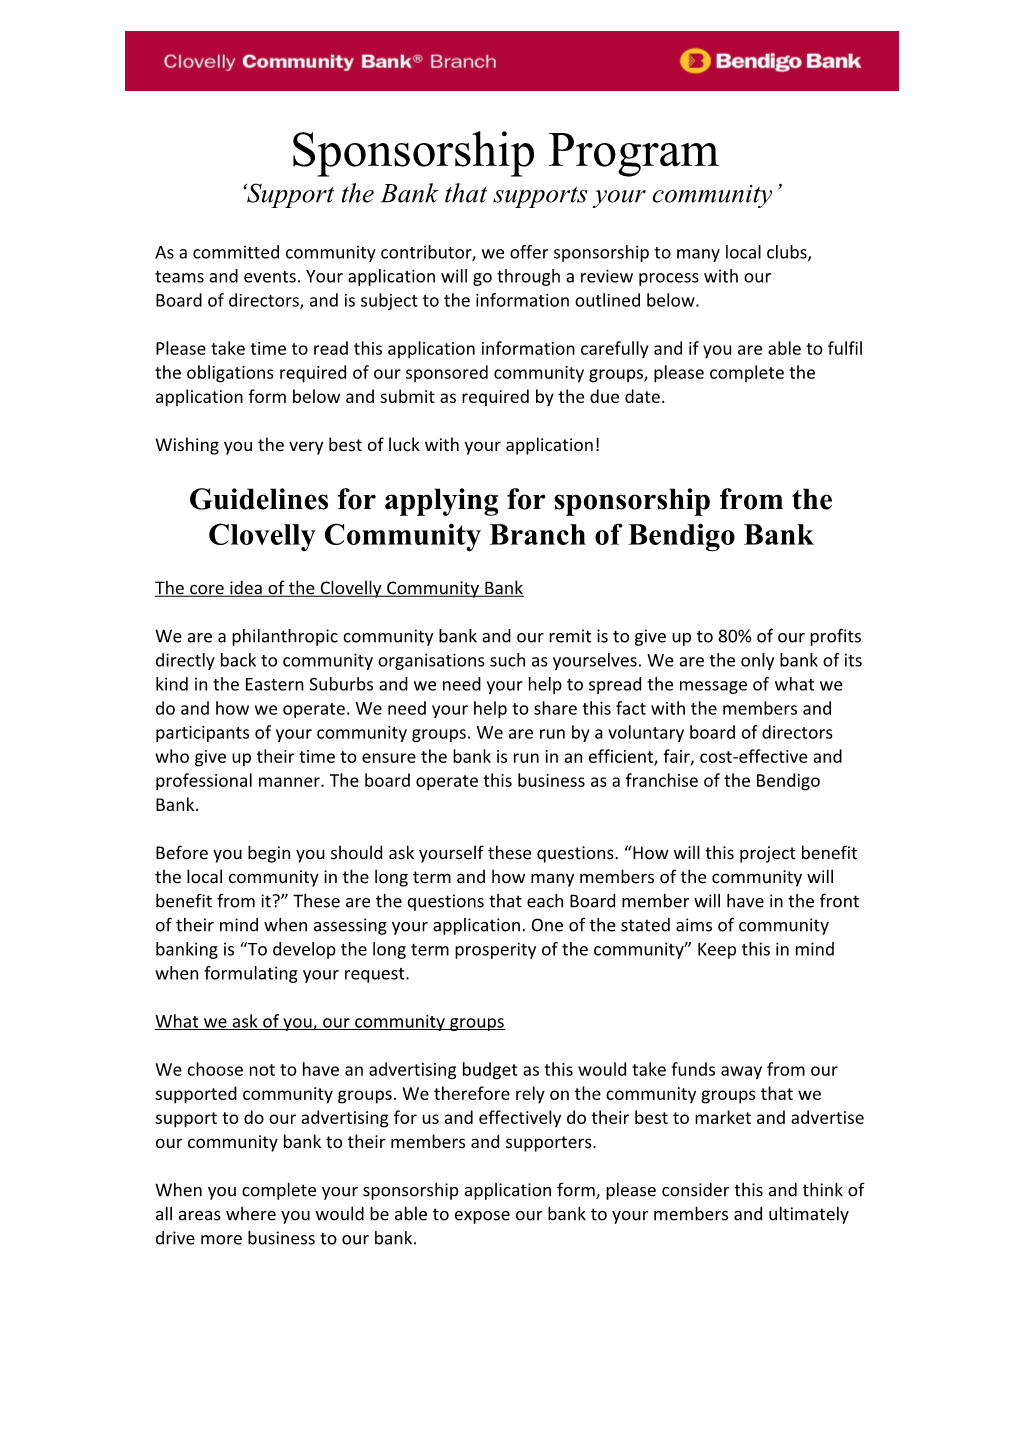 Support the Bank That Supports Your Community